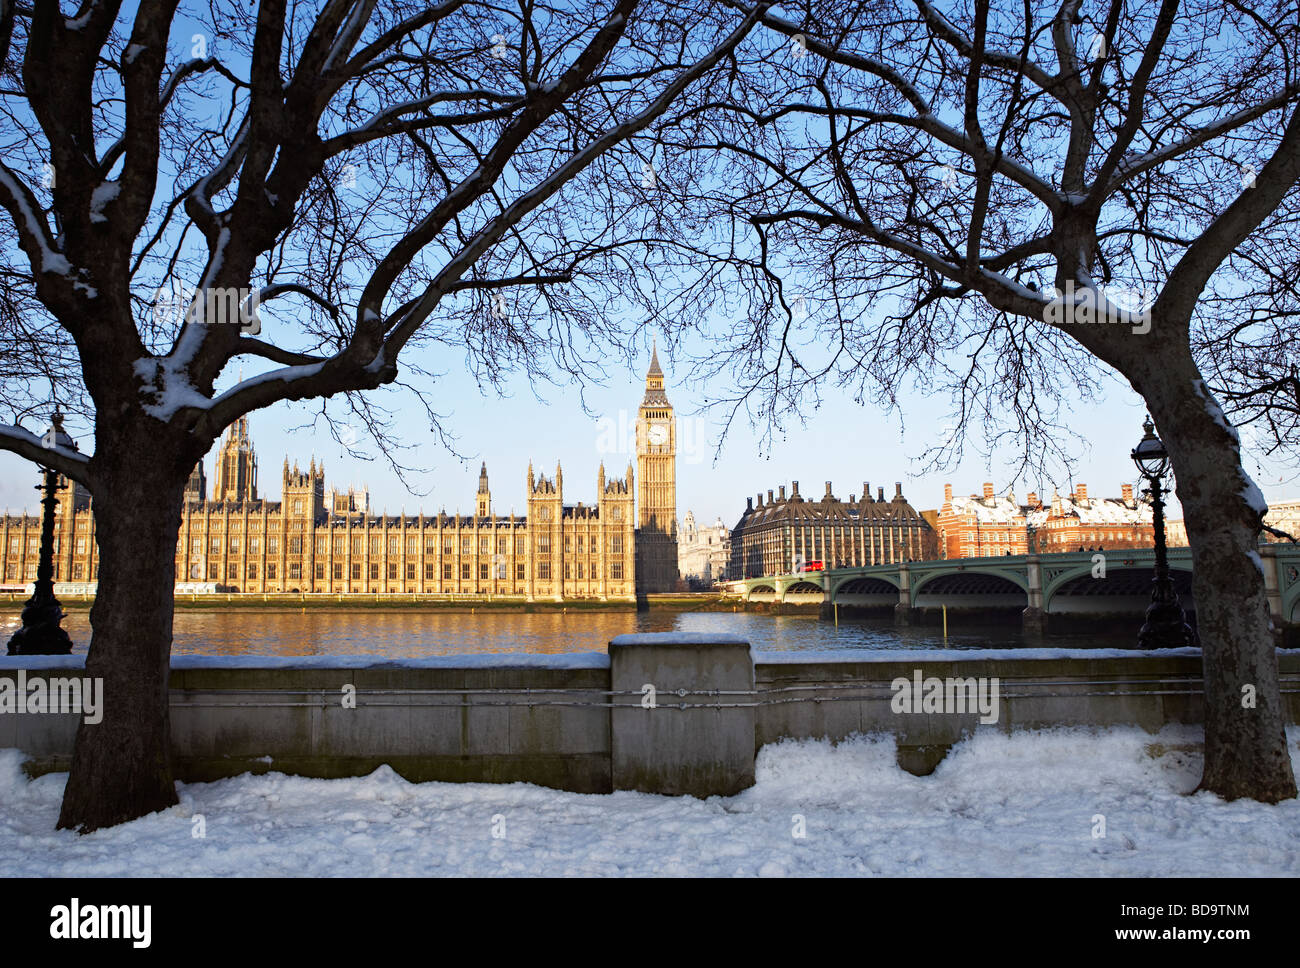 Snow on ground in front of Houses of Parliament and Big Ben London England Stock Photo